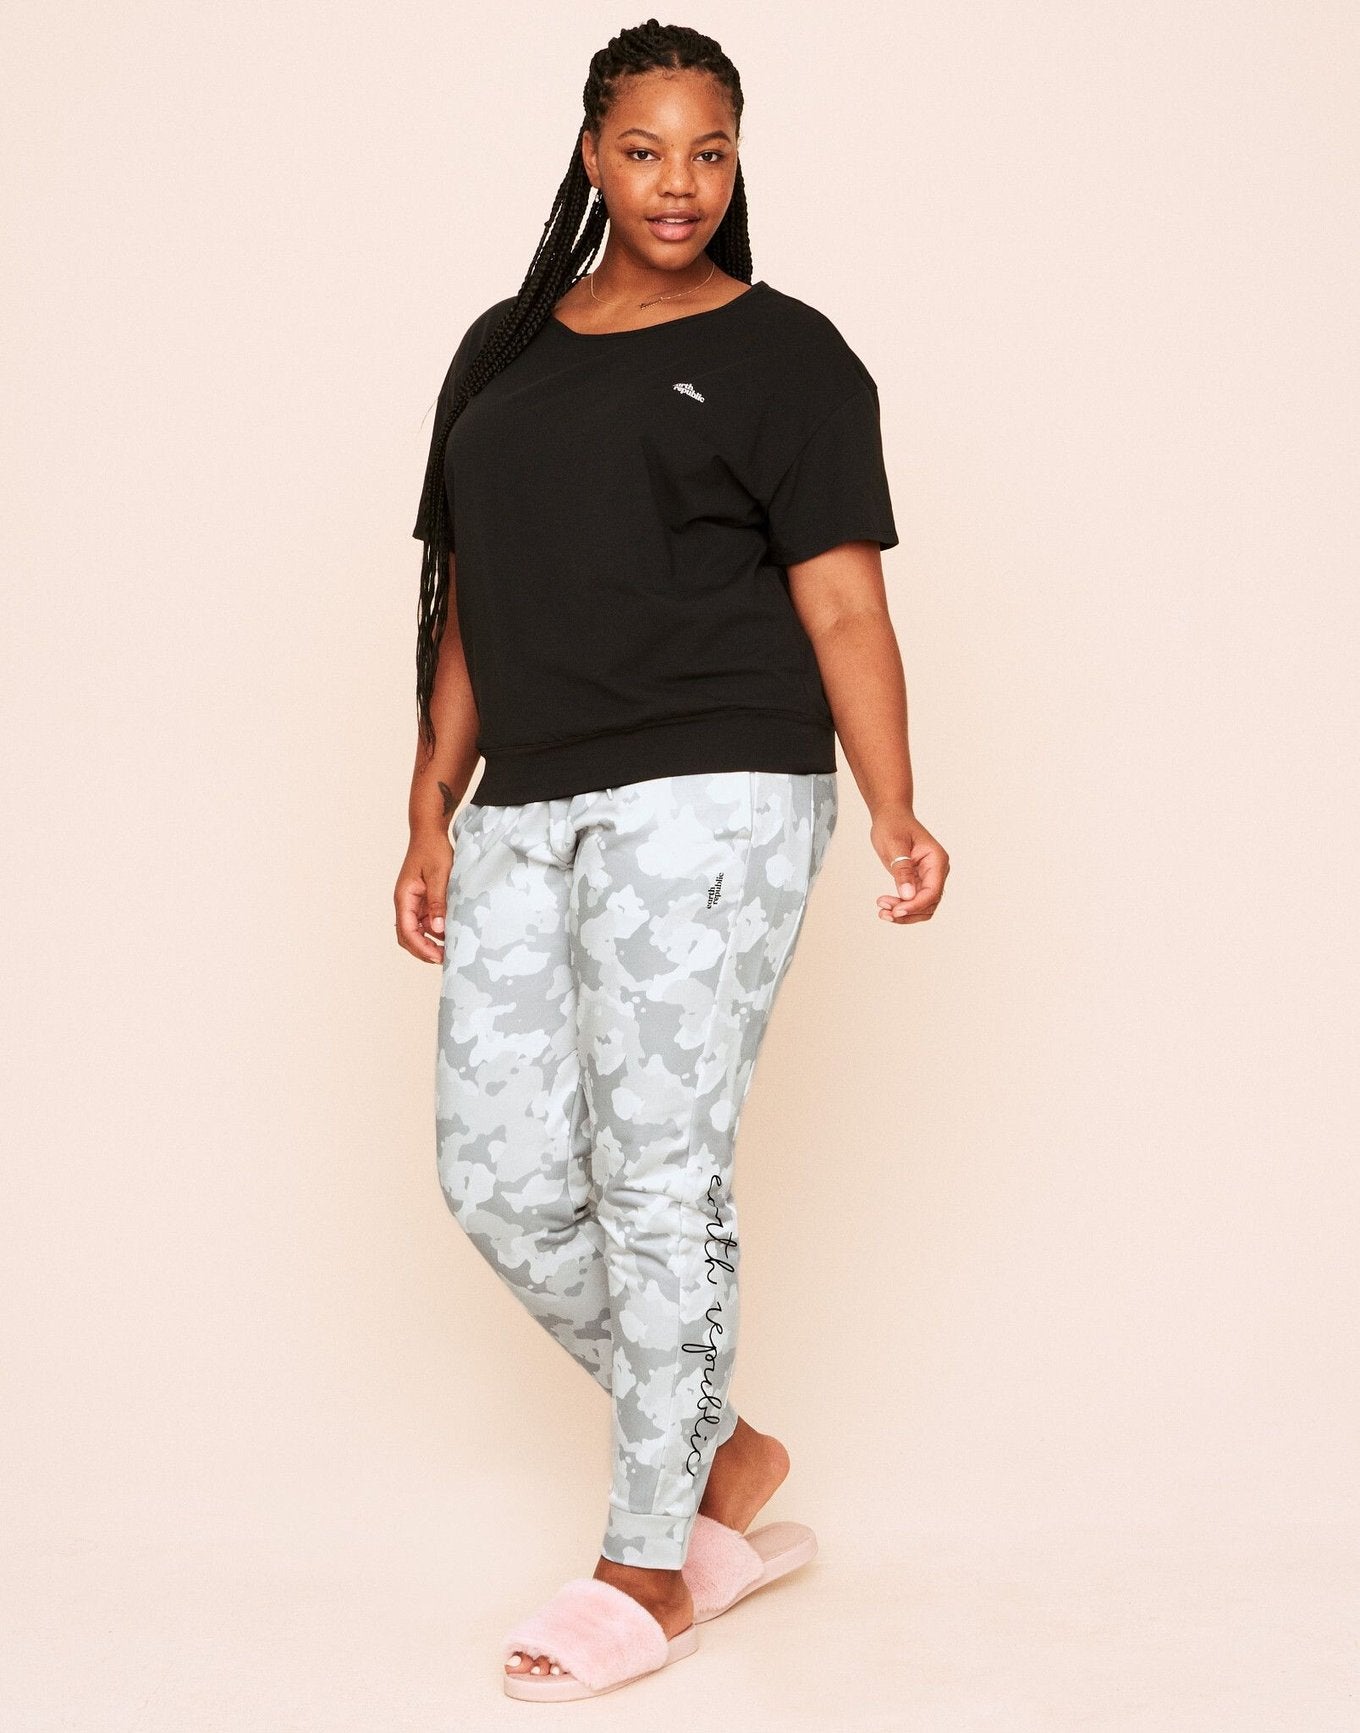 Earth Republic Shawn Jogger Pant Joggers in color Camouflage (Athleisure Print 3) and shape jogger